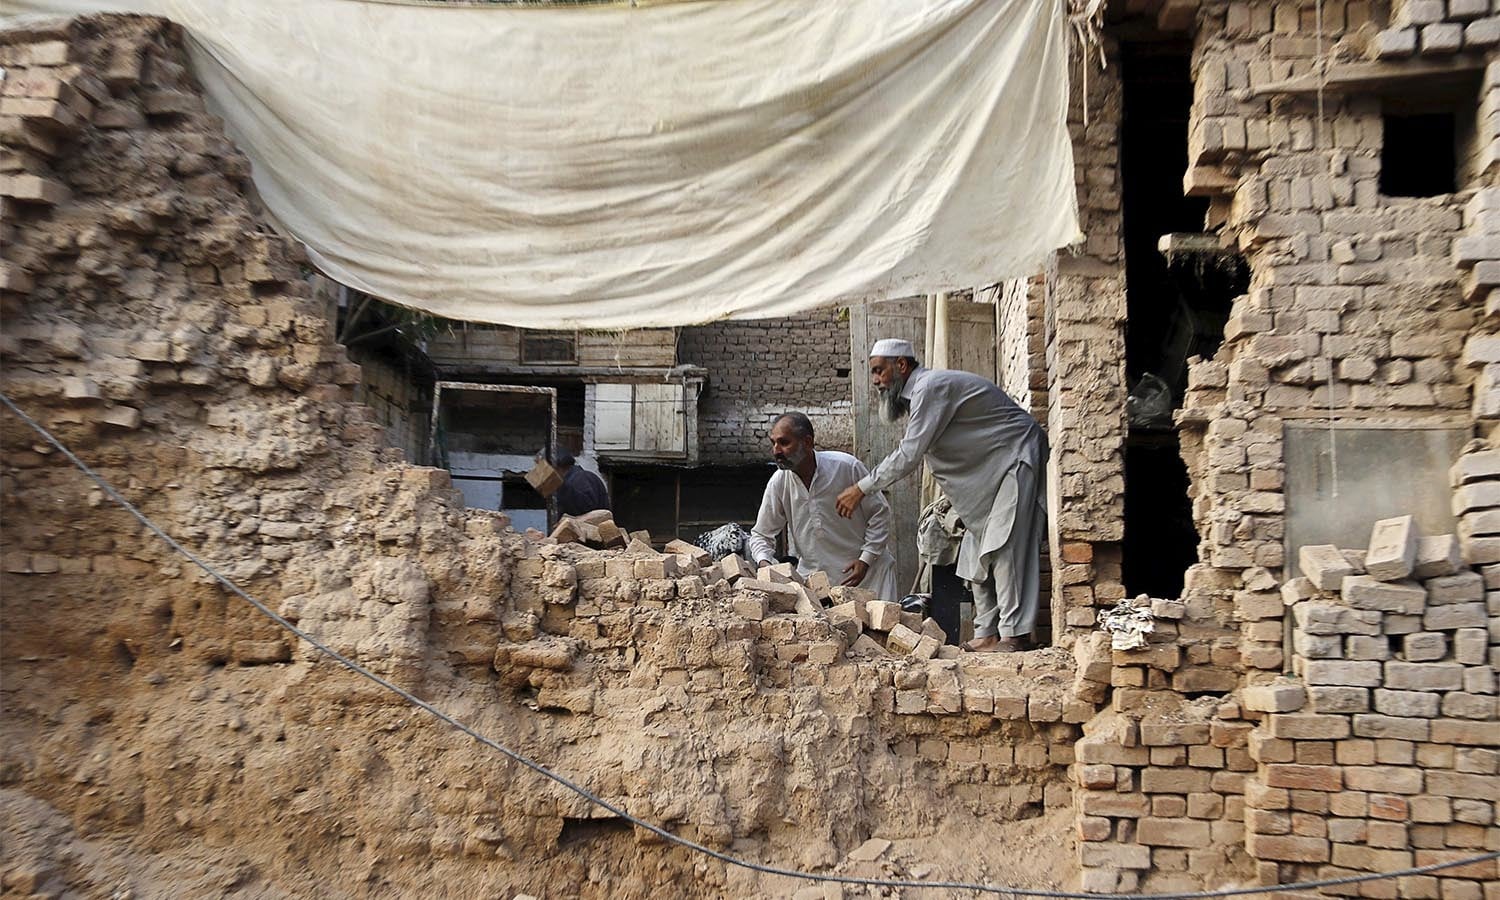 Residents clear the rubble of a house after it was damaged by an earthquake in Peshawar, Pakistan October 26, 2015. A powerful earthquake struck a remote area of northeastern Afghanistan on Monday, shaking the capital Kabul, as shockwaves were felt in northern India and in Pakistan's capital, where hundreds of people ran out of buildings as the ground rolled beneath them. REUTERS/Khuram Parvez